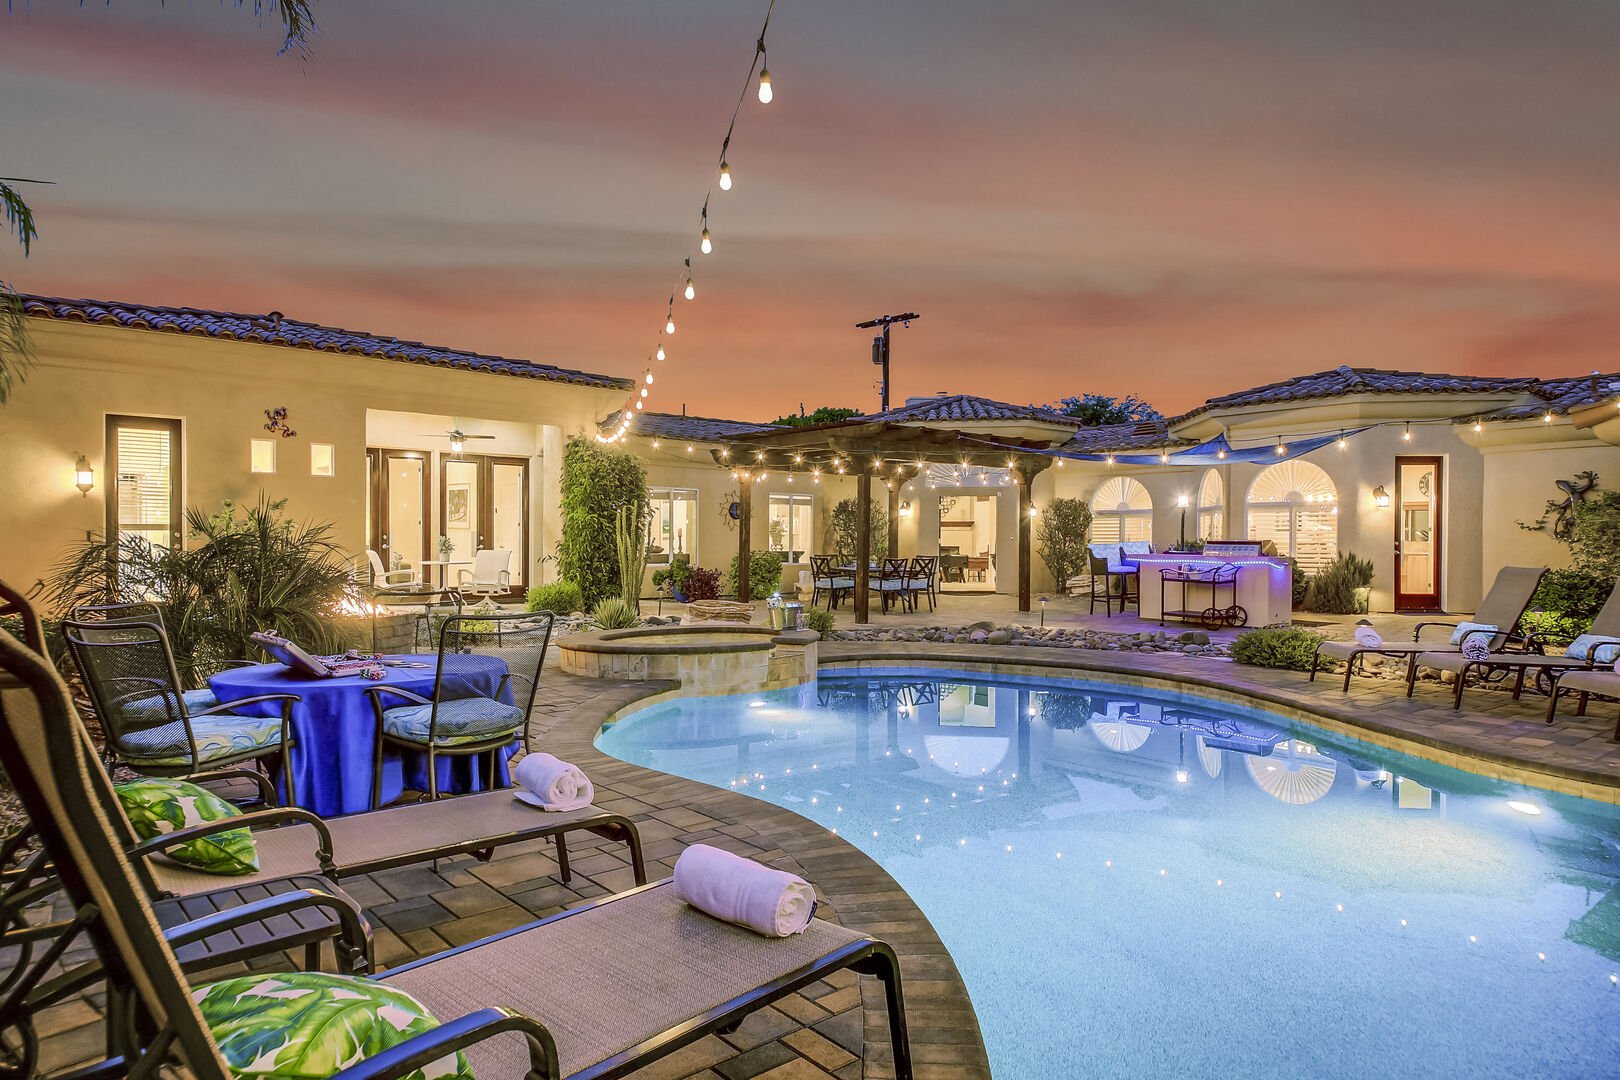 This resort style home is located in the world-famous community of La Quinta and is perfect for all your vacation needs.